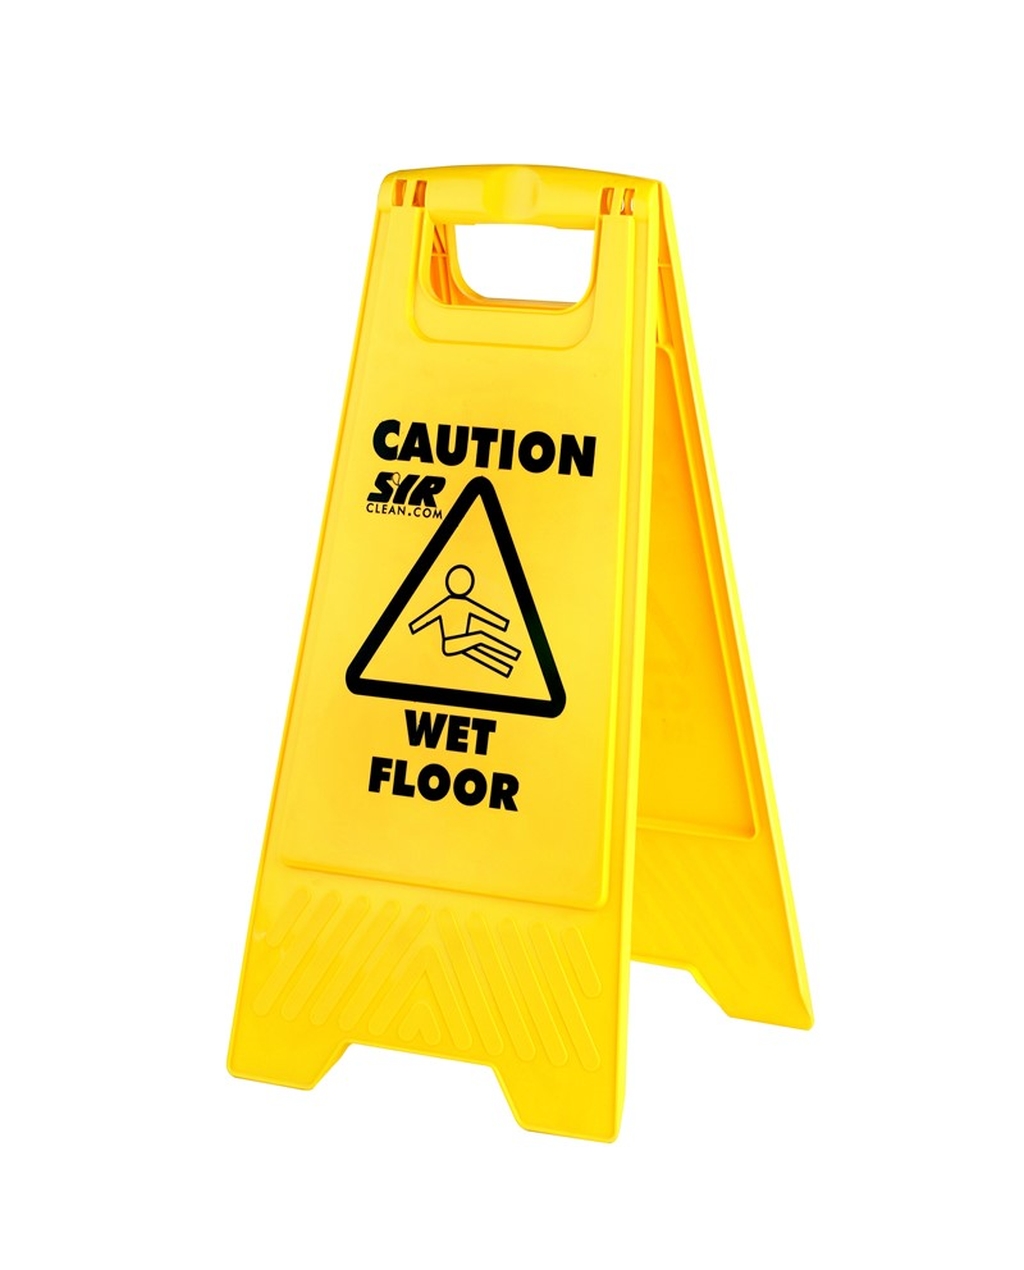 Dual Wording Caution Wet Floor and Cleaning in Progress – Westcare ...